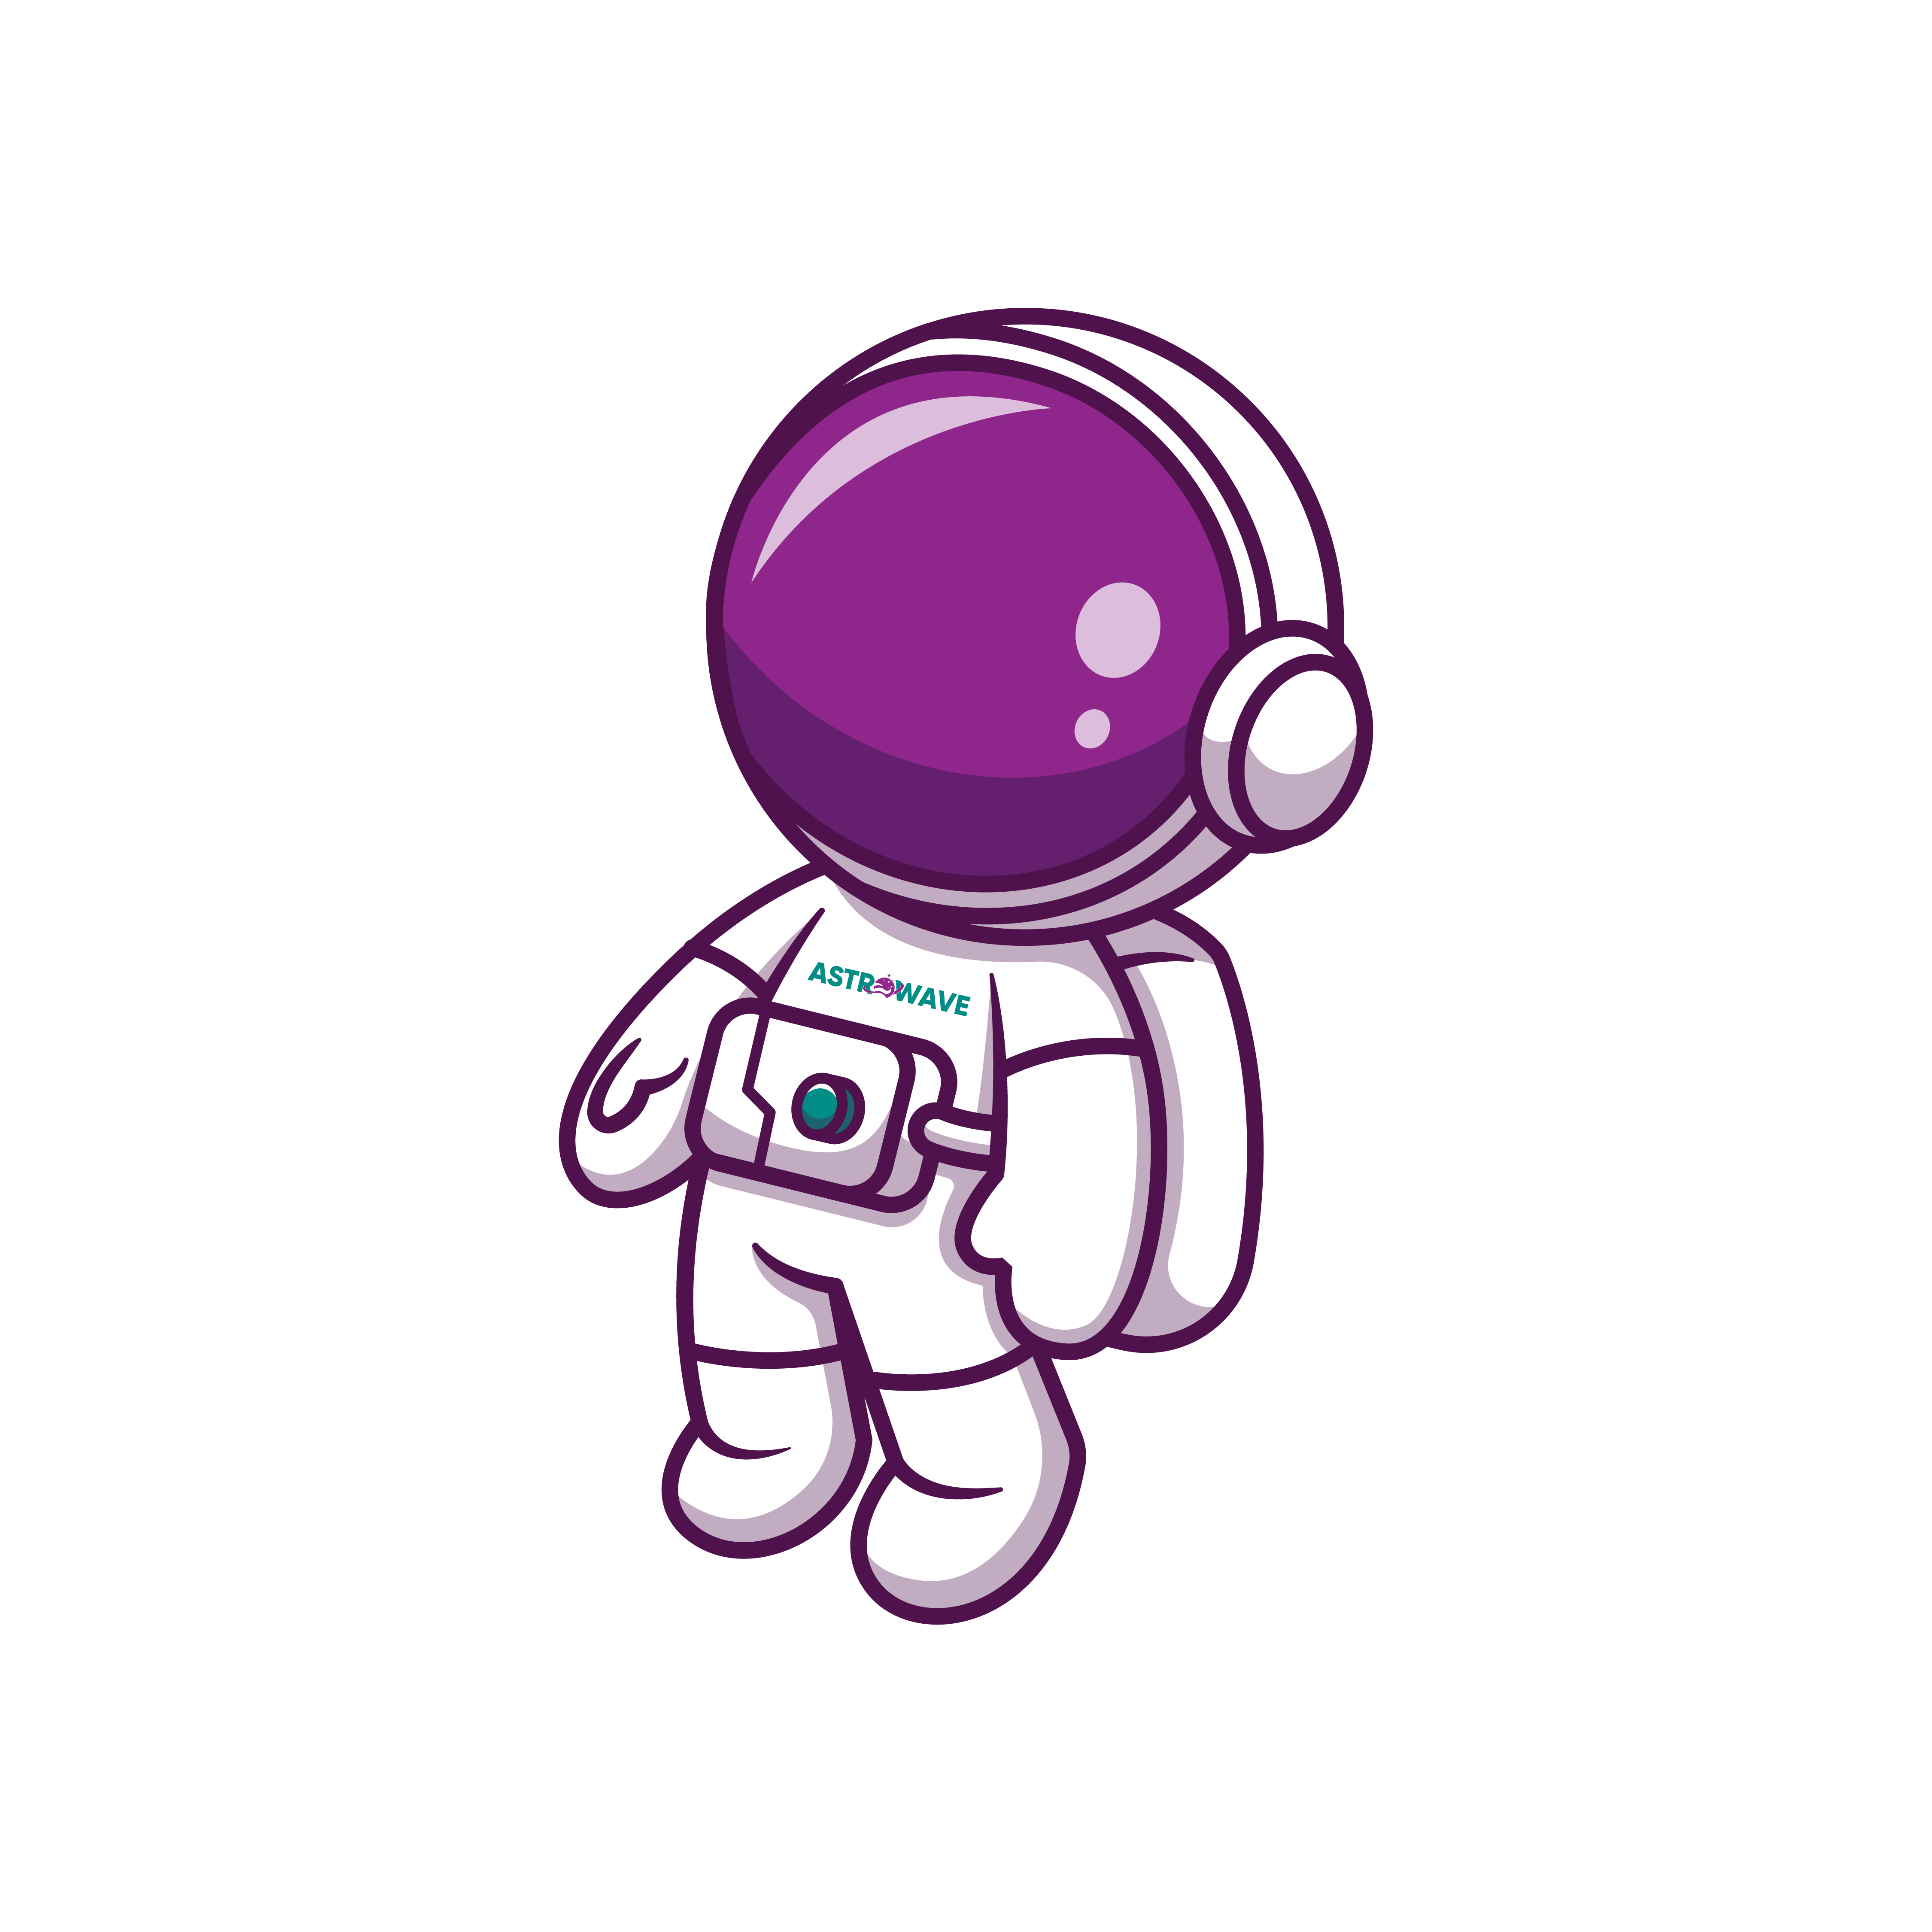 Astrowave astronaut floating in space